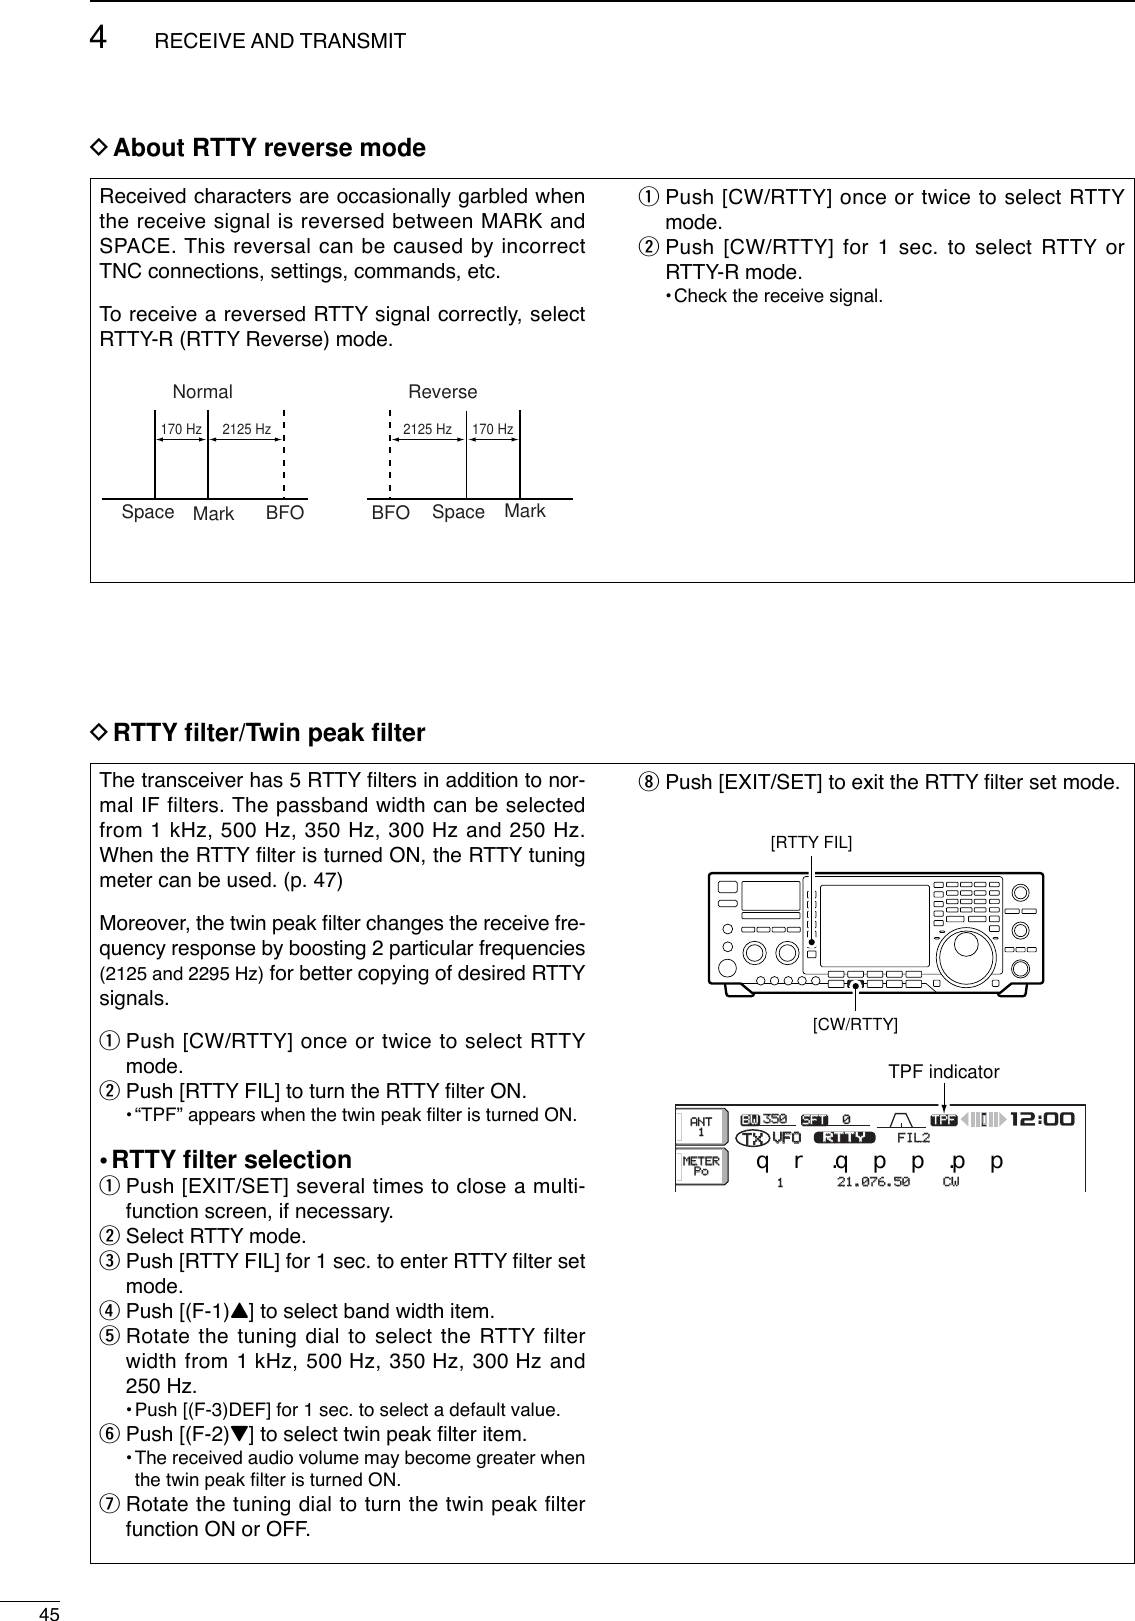 DRTTY ﬁlter/Twin peak ﬁlter454RECEIVE AND TRANSMITThe transceiver has 5 RTTY ﬁlters in addition to nor-mal IF filters. The passband width can be selectedfrom 1 kHz, 500 Hz, 350 Hz, 300 Hz and 250 Hz.When the RTTY ﬁlter is turned ON, the RTTY tuningmeter can be used. (p. 47)Moreover, the twin peak ﬁlter changes the receive fre-quency response by boosting 2 particular frequencies(2125 and 2295 Hz) for better copying of desired RTTYsignals.qPush [CW/RTTY] once or twice to select RTTYmode.wPush [RTTY FIL] to turn the RTTY ﬁlter ON.•“TPF” appears when the twin peak ﬁlter is turned ON.•RTTY ﬁlter selectionqPush [EXIT/SET] several times to close a multi-function screen, if necessary.wSelect RTTY mode.ePush [RTTY FIL] for 1 sec. to enter RTTY ﬁlter setmode.rPush [(F-1)Y] to select band width item.tRotate the tuning dial to select the RTTY filterwidth from 1 kHz, 500 Hz, 350 Hz, 300 Hz and250 Hz.•Push [(F-3)DEF] for 1 sec. to select a default value.yPush [(F-2)Z] to select twin peak ﬁlter item.•The received audio volume may become greater whenthe twin peak ﬁlter is turned ON.uRotate the tuning dial to turn the twin peak filterfunction ON or OFF.iPush [EXIT/SET] to exit the RTTY ﬁlter set mode.BWBW 350350 SFTSFT 0VFOVFO FIL2FIL2RTTYRTTYqw:ppTXTX1CWCWqr.qpp.pp21.076.5021.076.50TPFTPFMETERMETERPoPoANTANT1[RTTY FIL][CW/RTTY]TPF indicatorDAbout RTTY reverse modeReceived characters are occasionally garbled whenthe receive signal is reversed between MARK andSPACE. This reversal can be caused by incorrectTNC connections, settings, commands, etc.To  receive a reversed RTTY signal correctly, selectRTTY-R (RTTY Reverse) mode.qPush [CW/RTTY] once or twice to select RTTYmode.wPush [CW/RTTY] for 1 sec. to select RTTY orRTTY-R mode.•Check the receive signal.Normal ReverseSpace Mark BFO Space MarkBFO170 Hz 2125 Hz 170 Hz2125 Hz